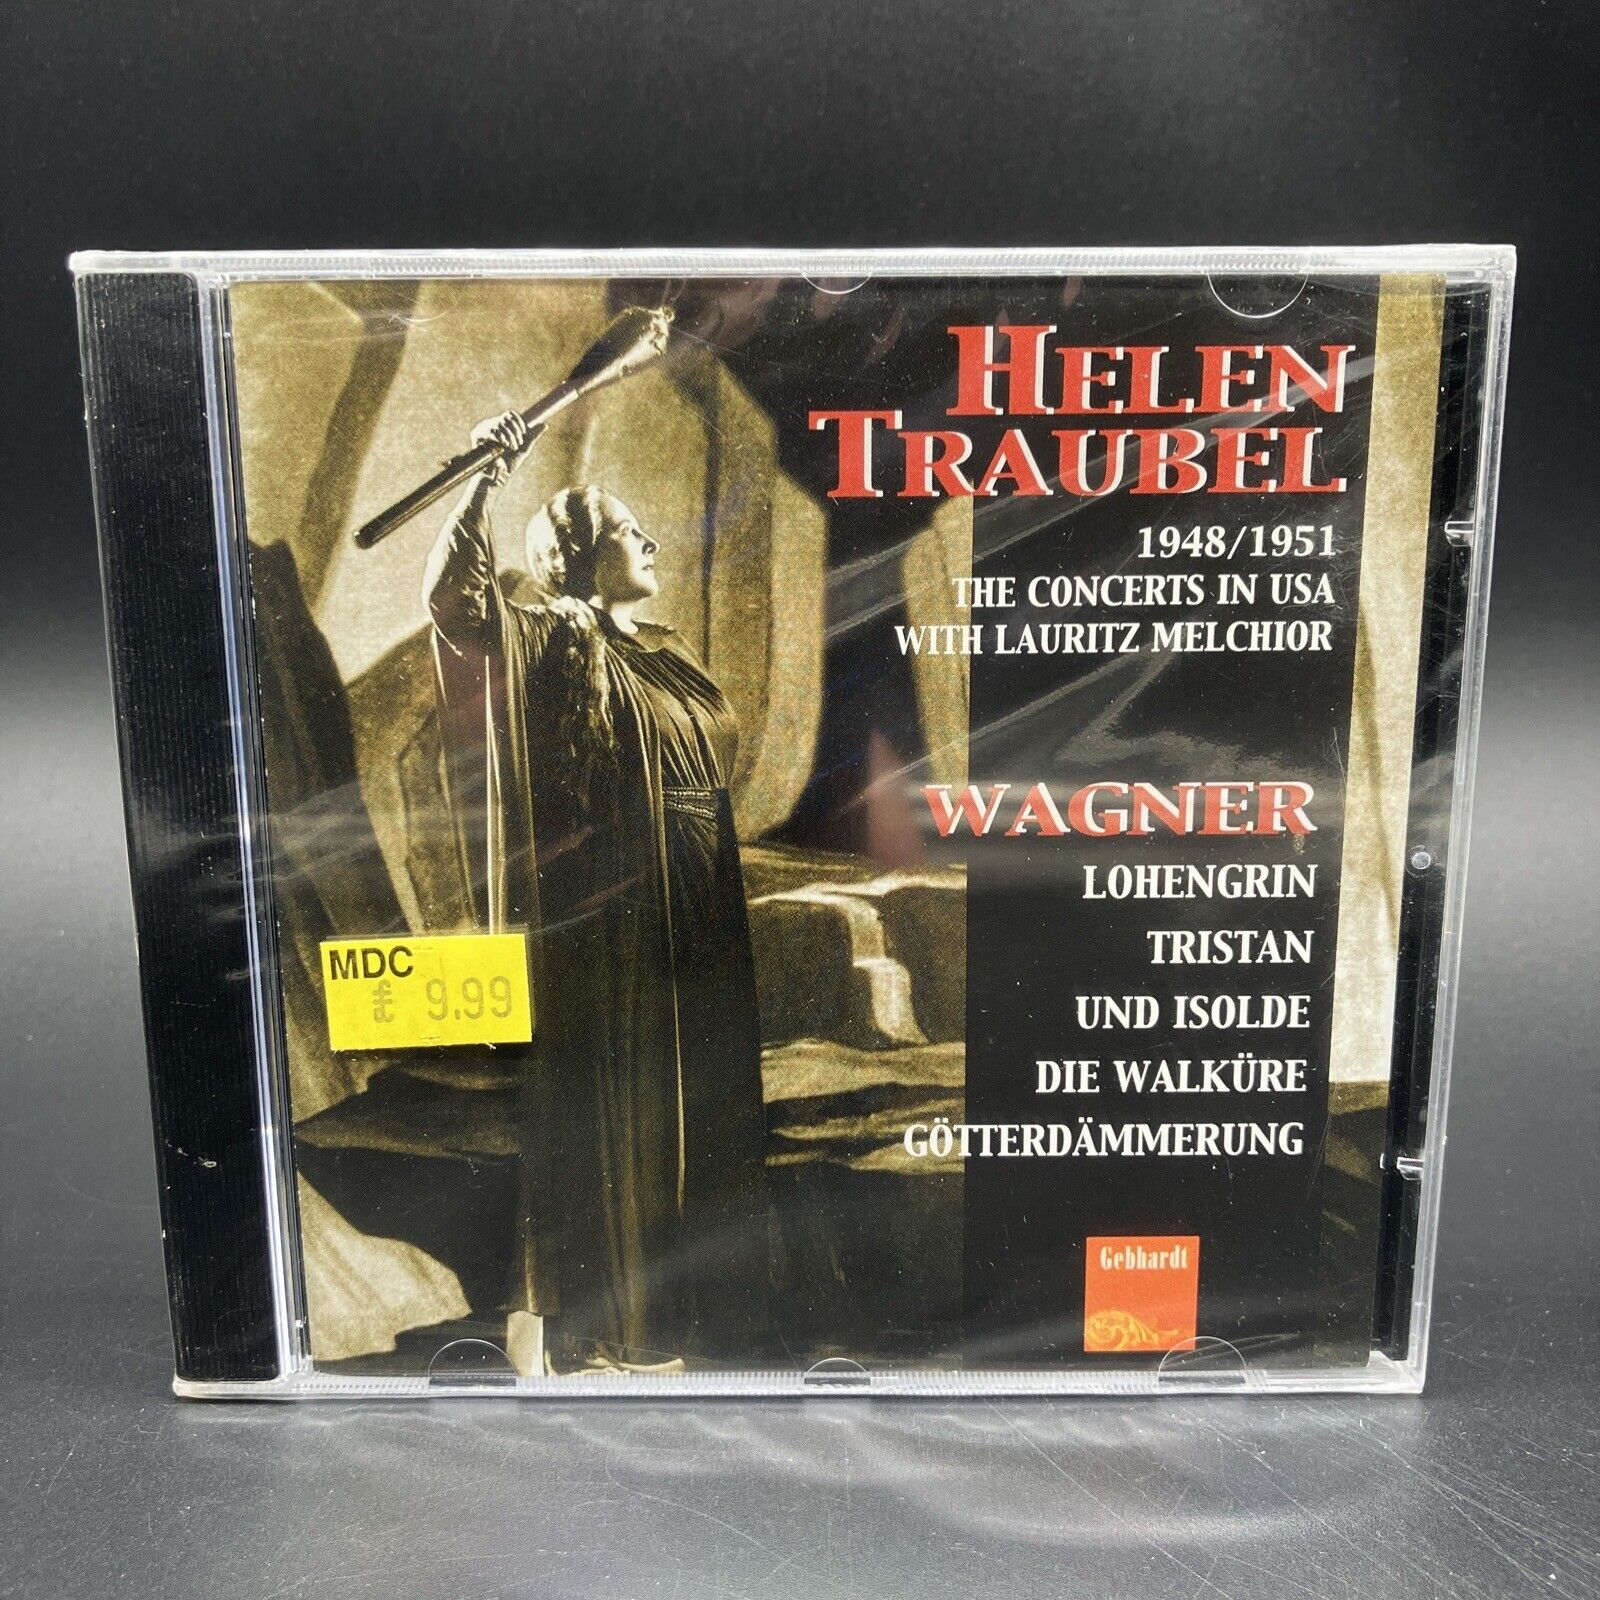 Helen Traubel In Concert - 1948/1951 Wagner CD - Import - New Sealed